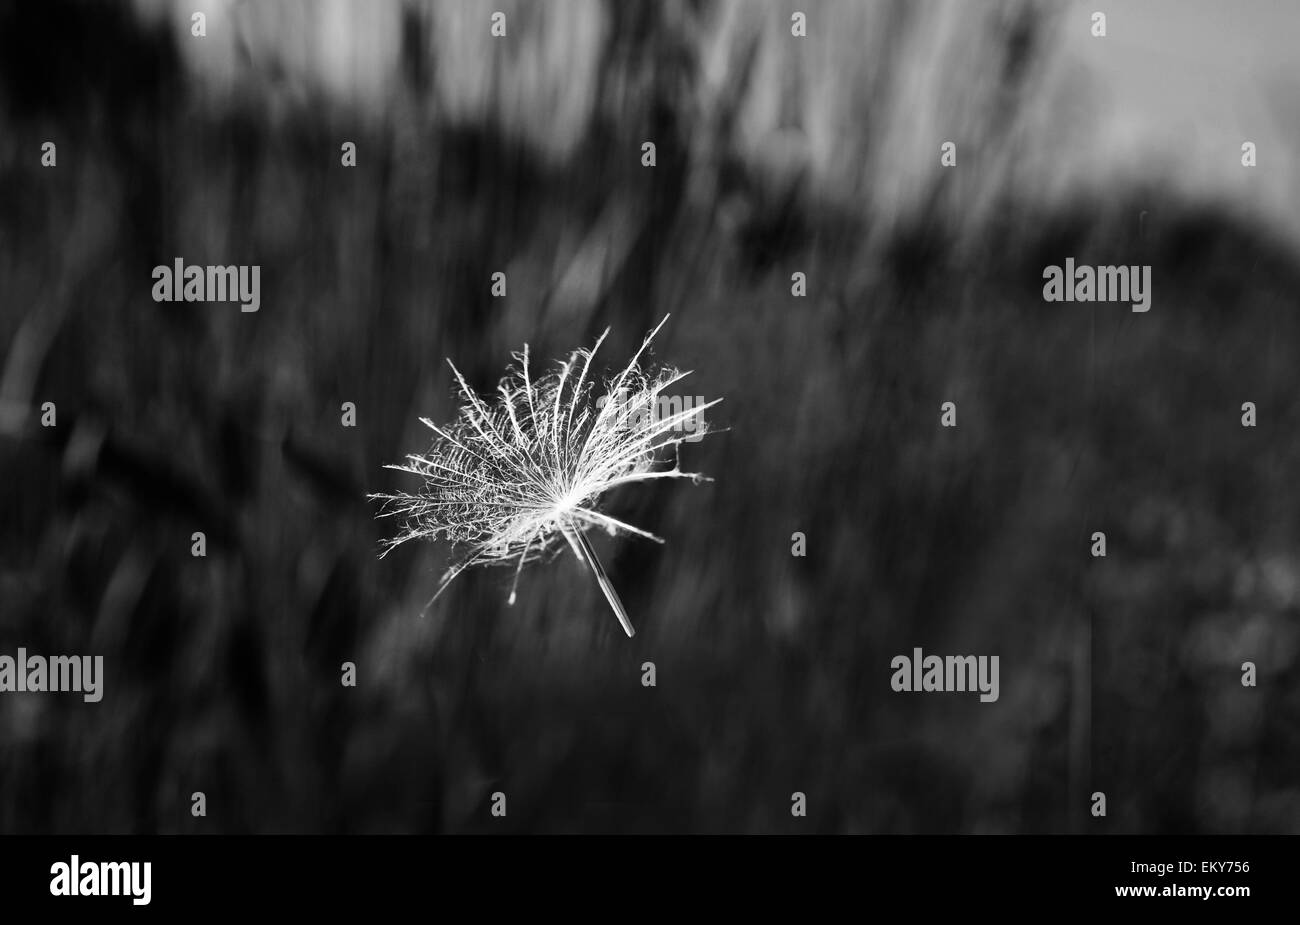 Taraxacum officinale floral Black and White Stock Photos & Images - Alamy